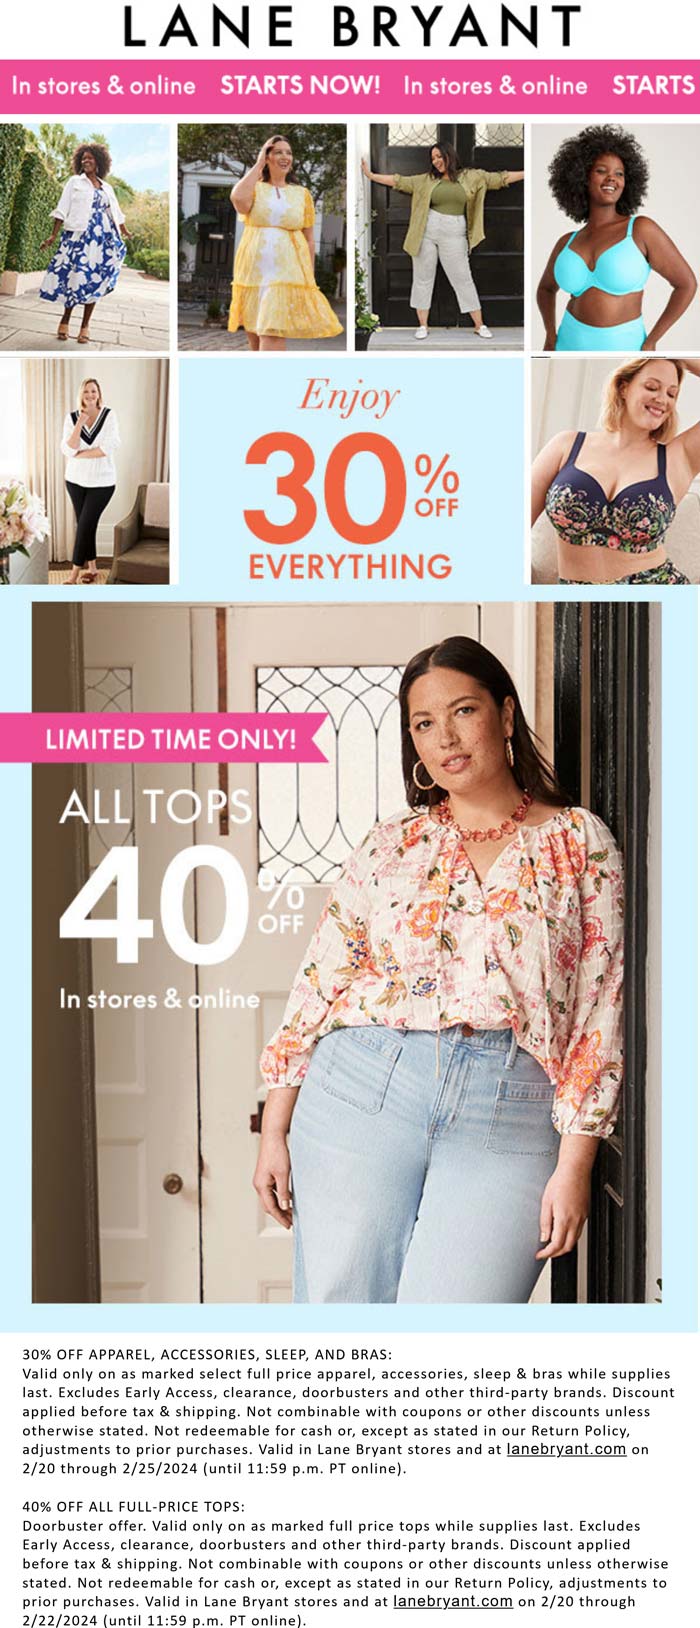 Lane Bryant stores Coupon  30% off everything & 40% off tops at Lane Bryant, also online #lanebryant 